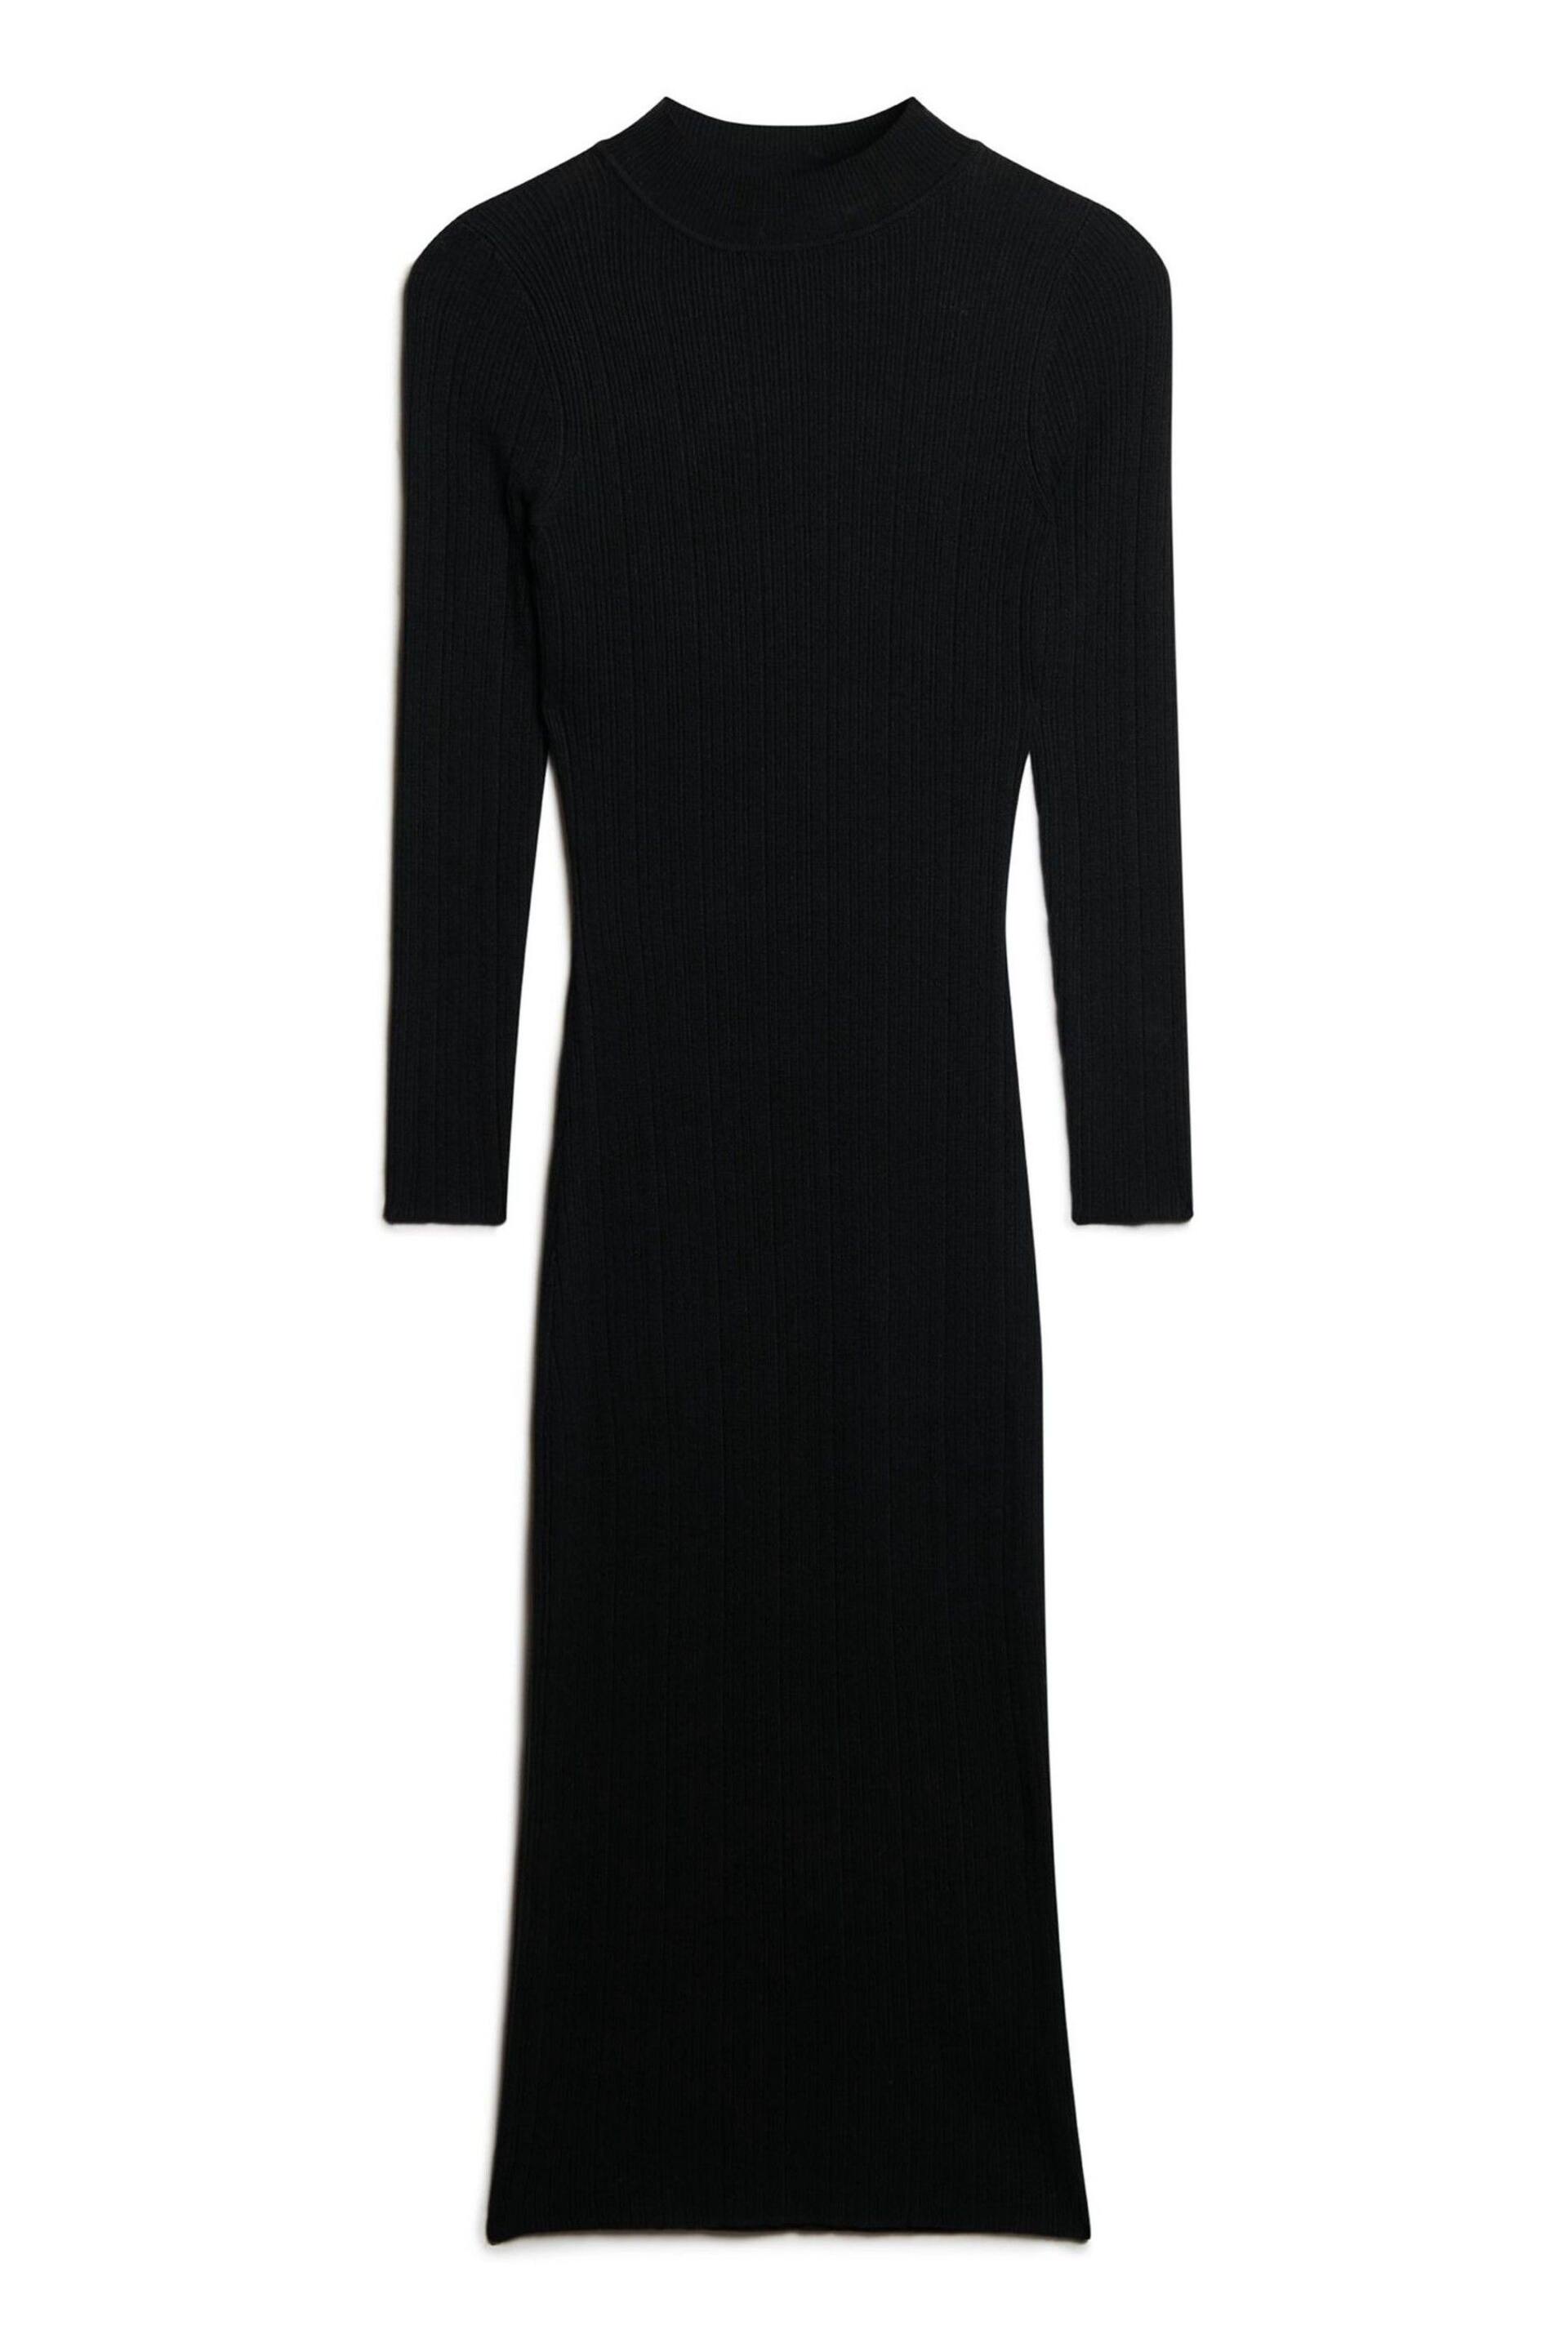 Superdry Black Backless Bodycon Midi Dress - Image 6 of 6